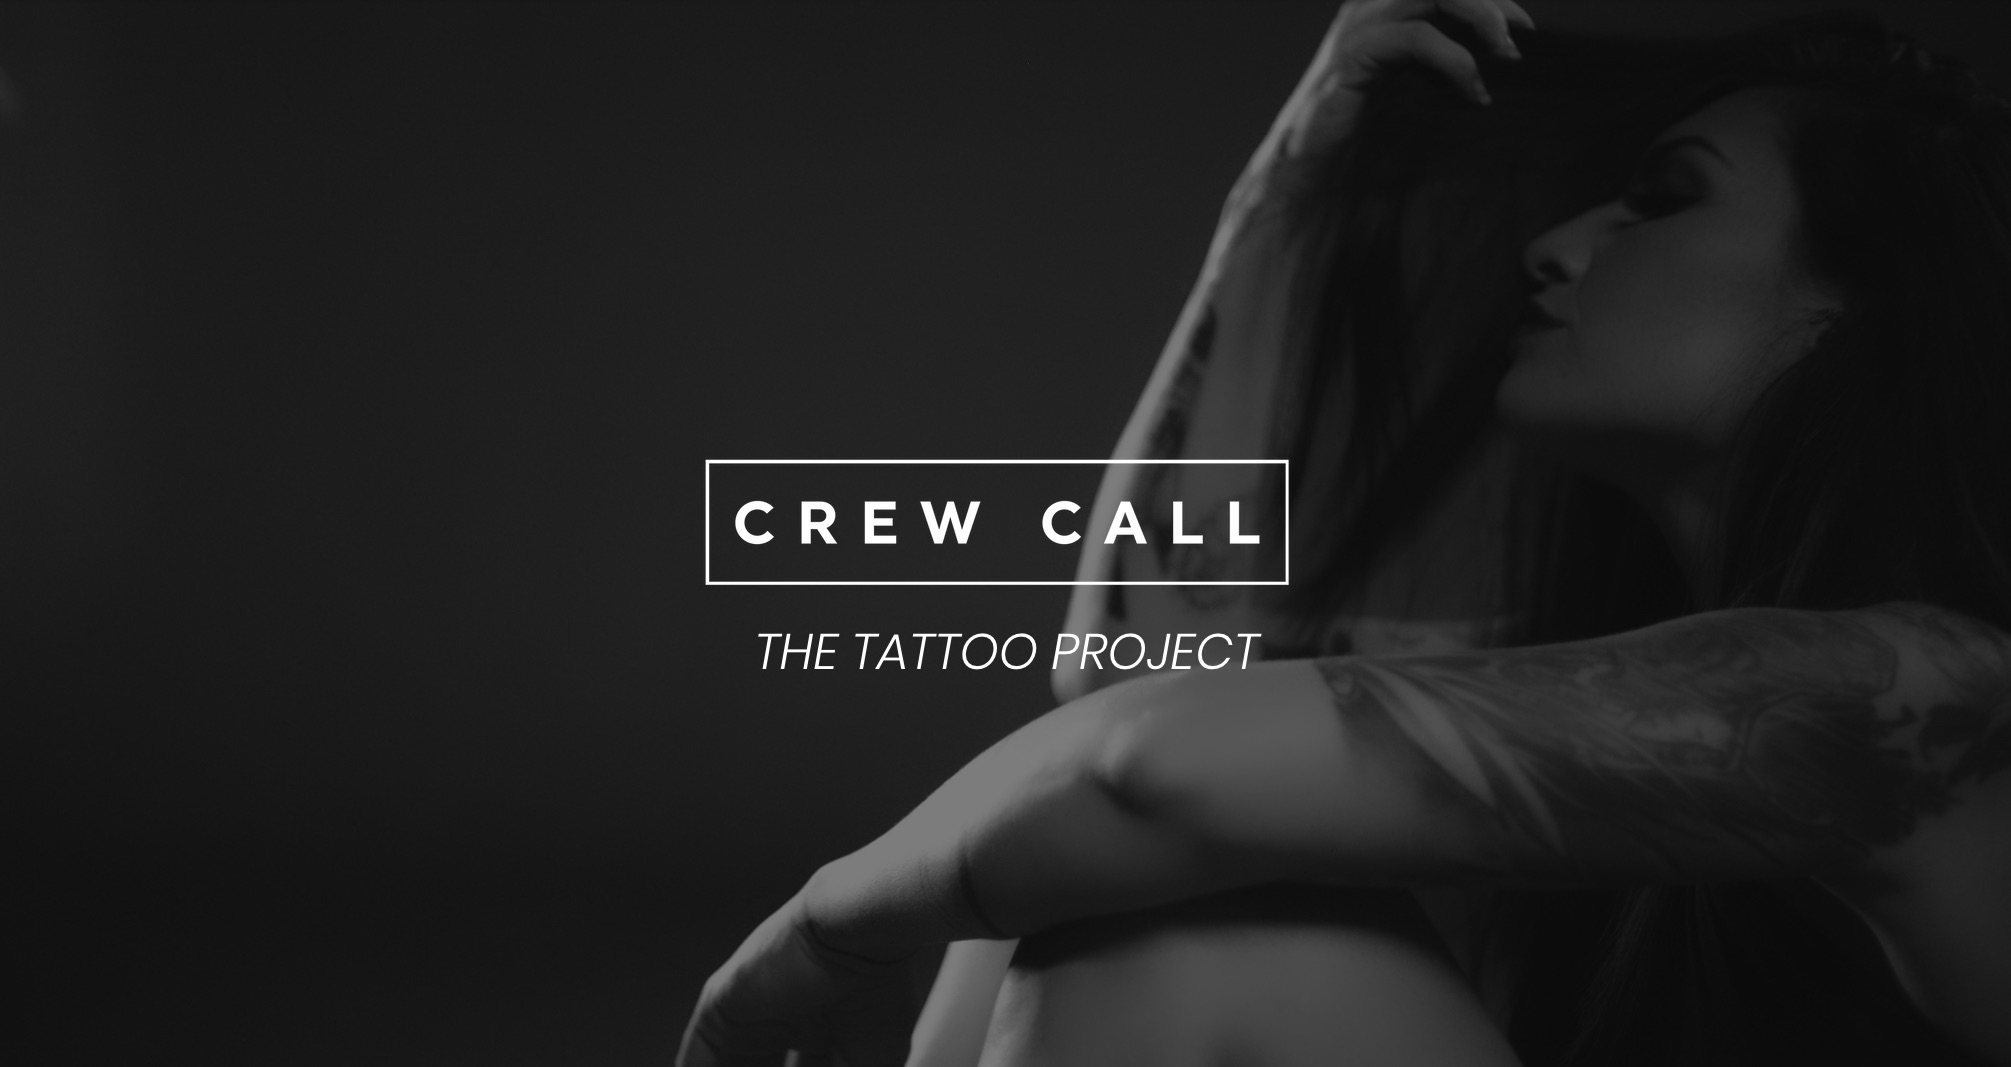 White Crew Call The Tattoo Project logo on black and white background of side profile of a tattooed model